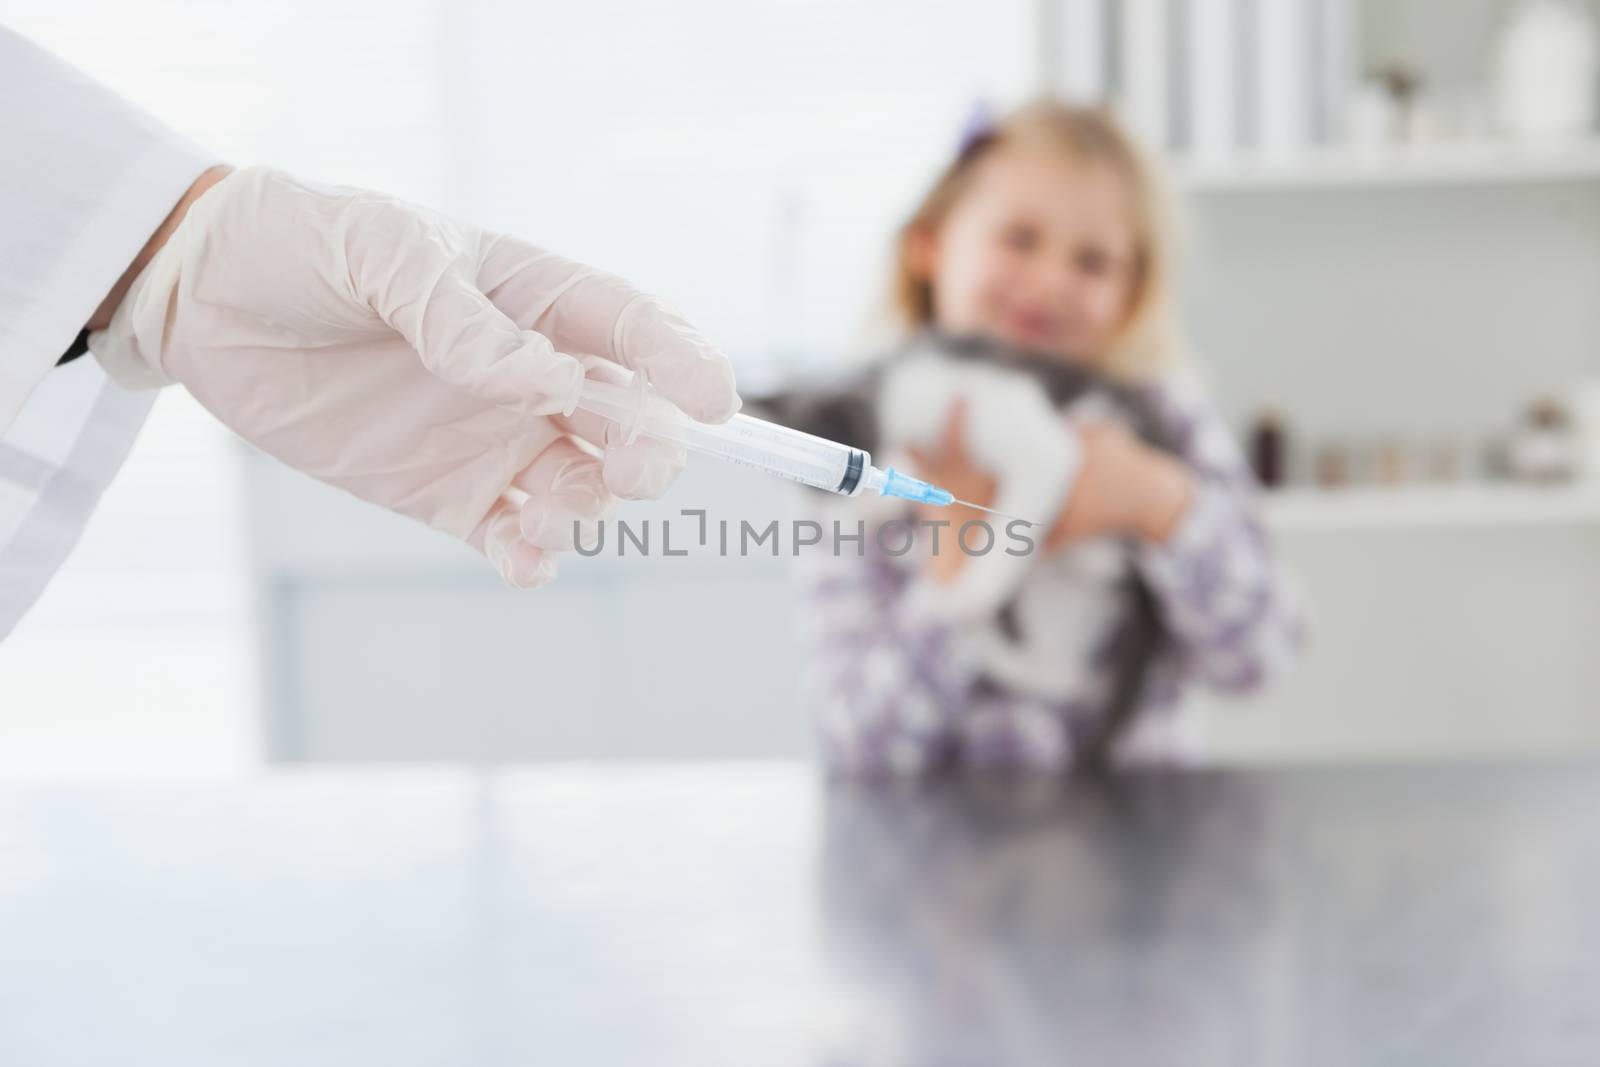 Veterinarian doing injecting at a cute kitten in medical office